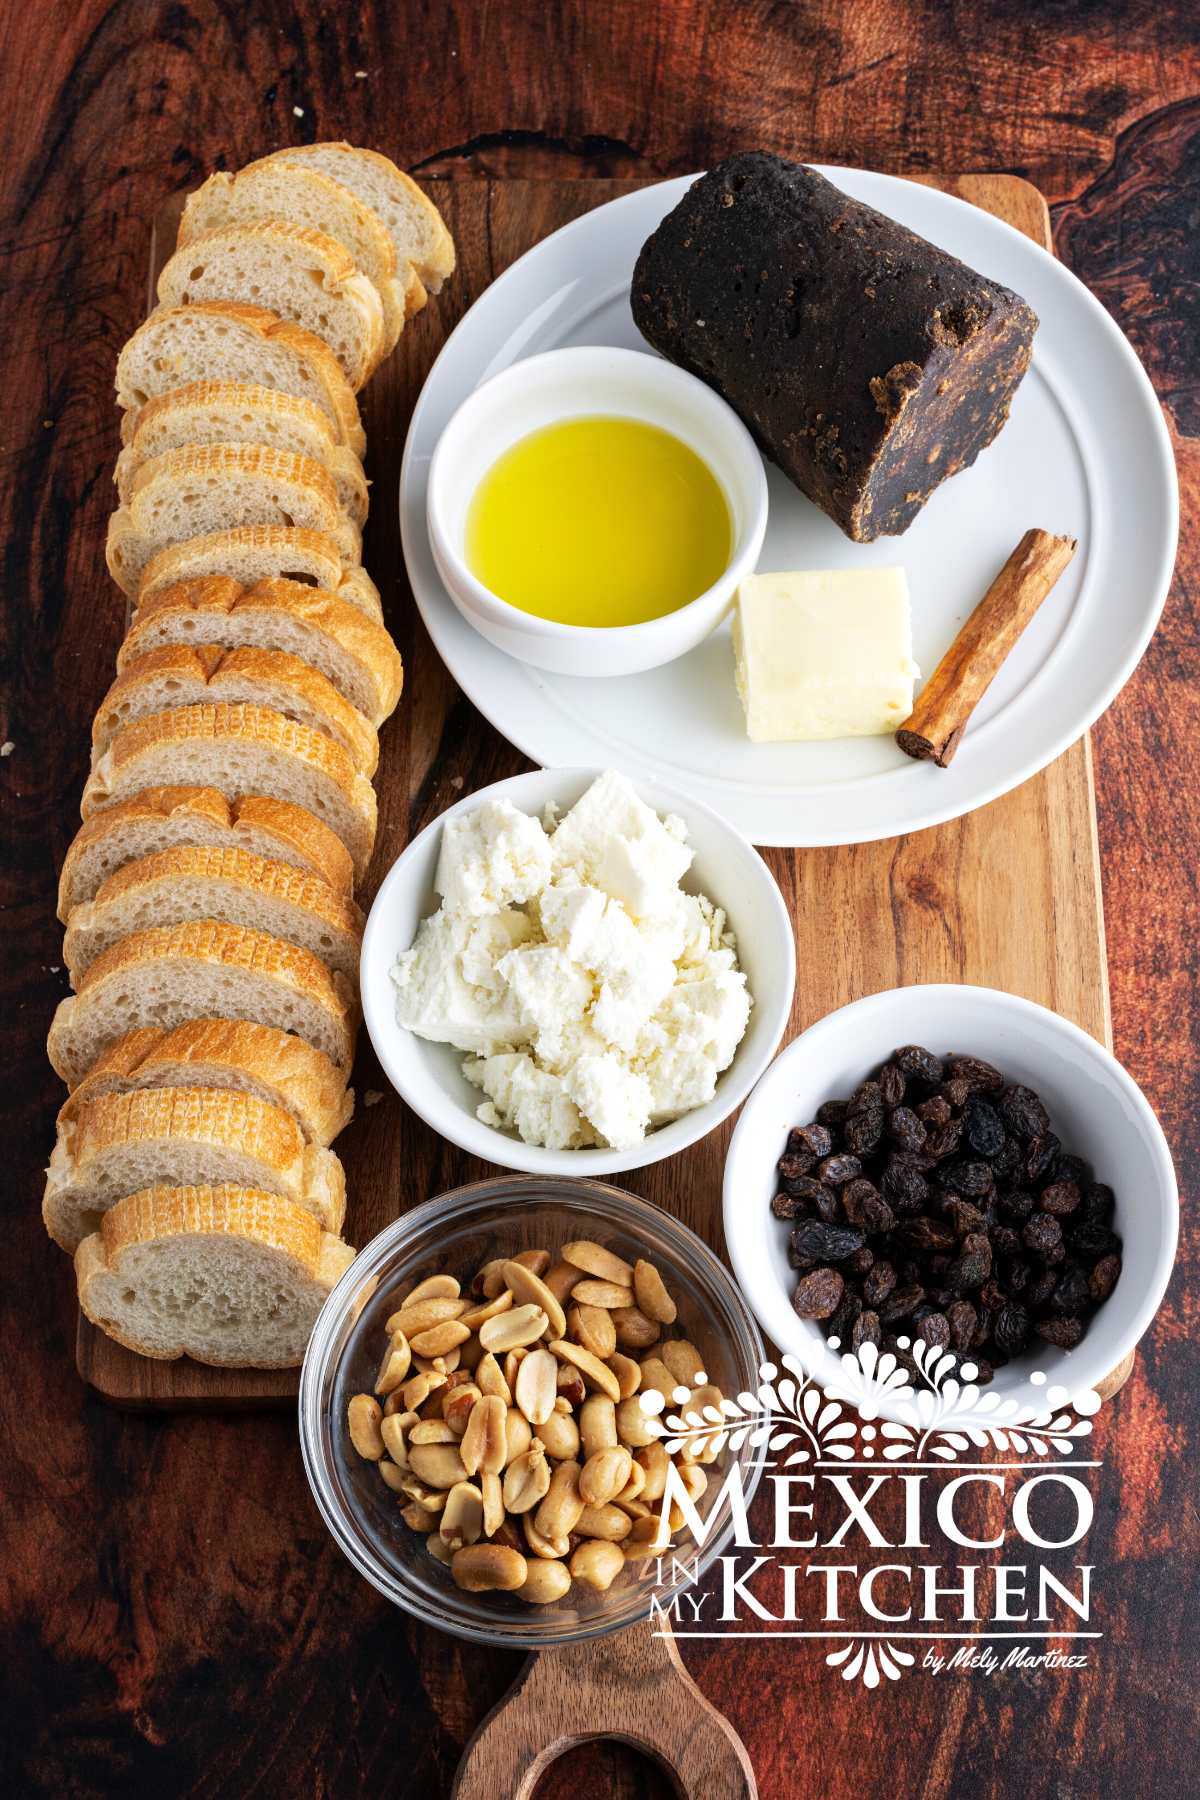 Slices of bread, cotija cheese, nuts, raisins, piloncillo and Mexican cinnamon on a cutting board.